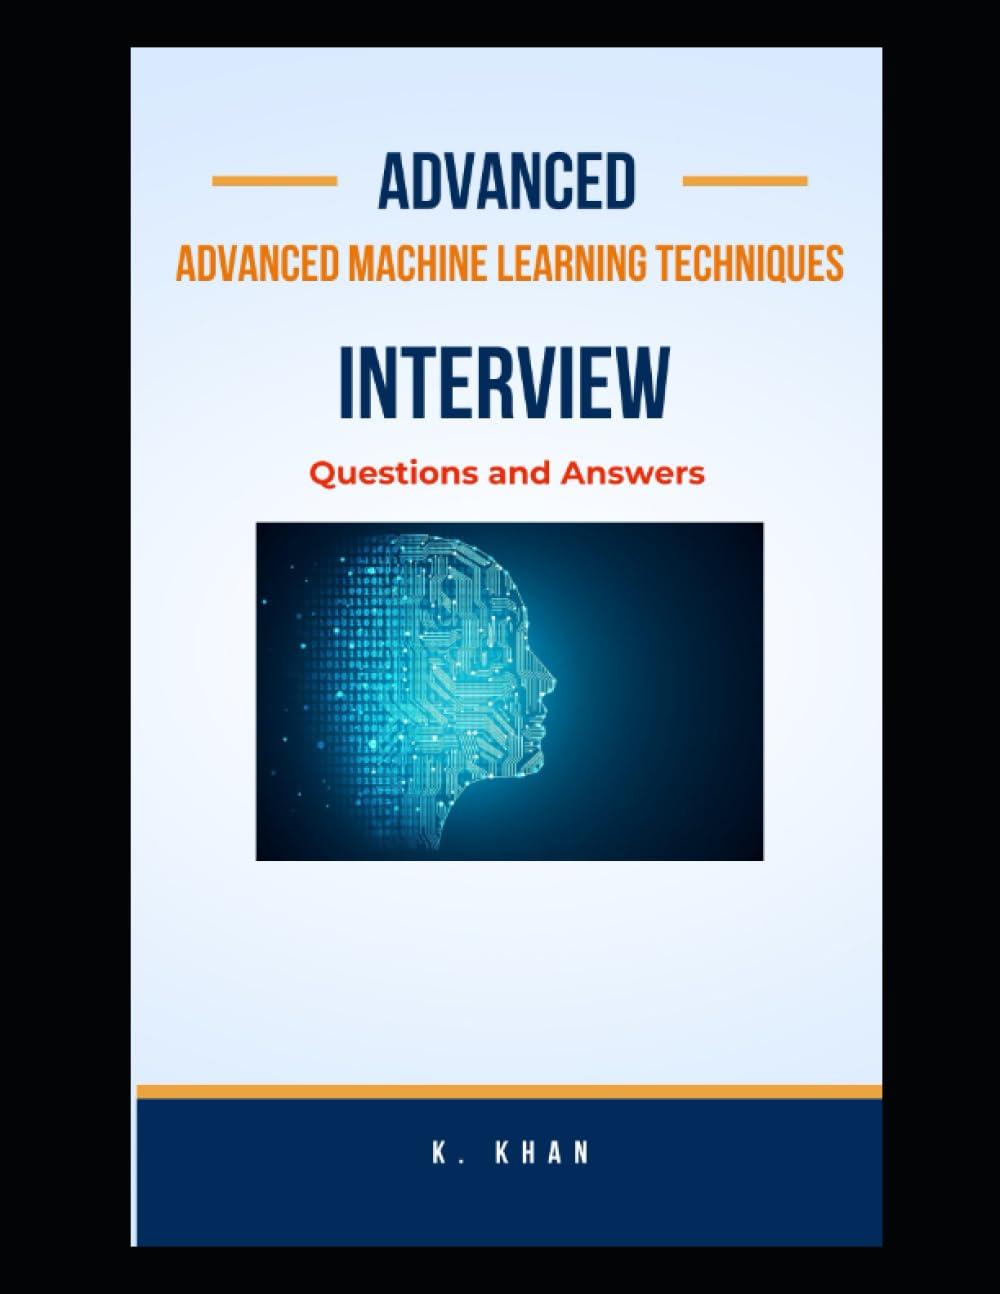 advanced machine learning techniques interview questions and answers 1st edition khairullah khan b0chl7dhyl,